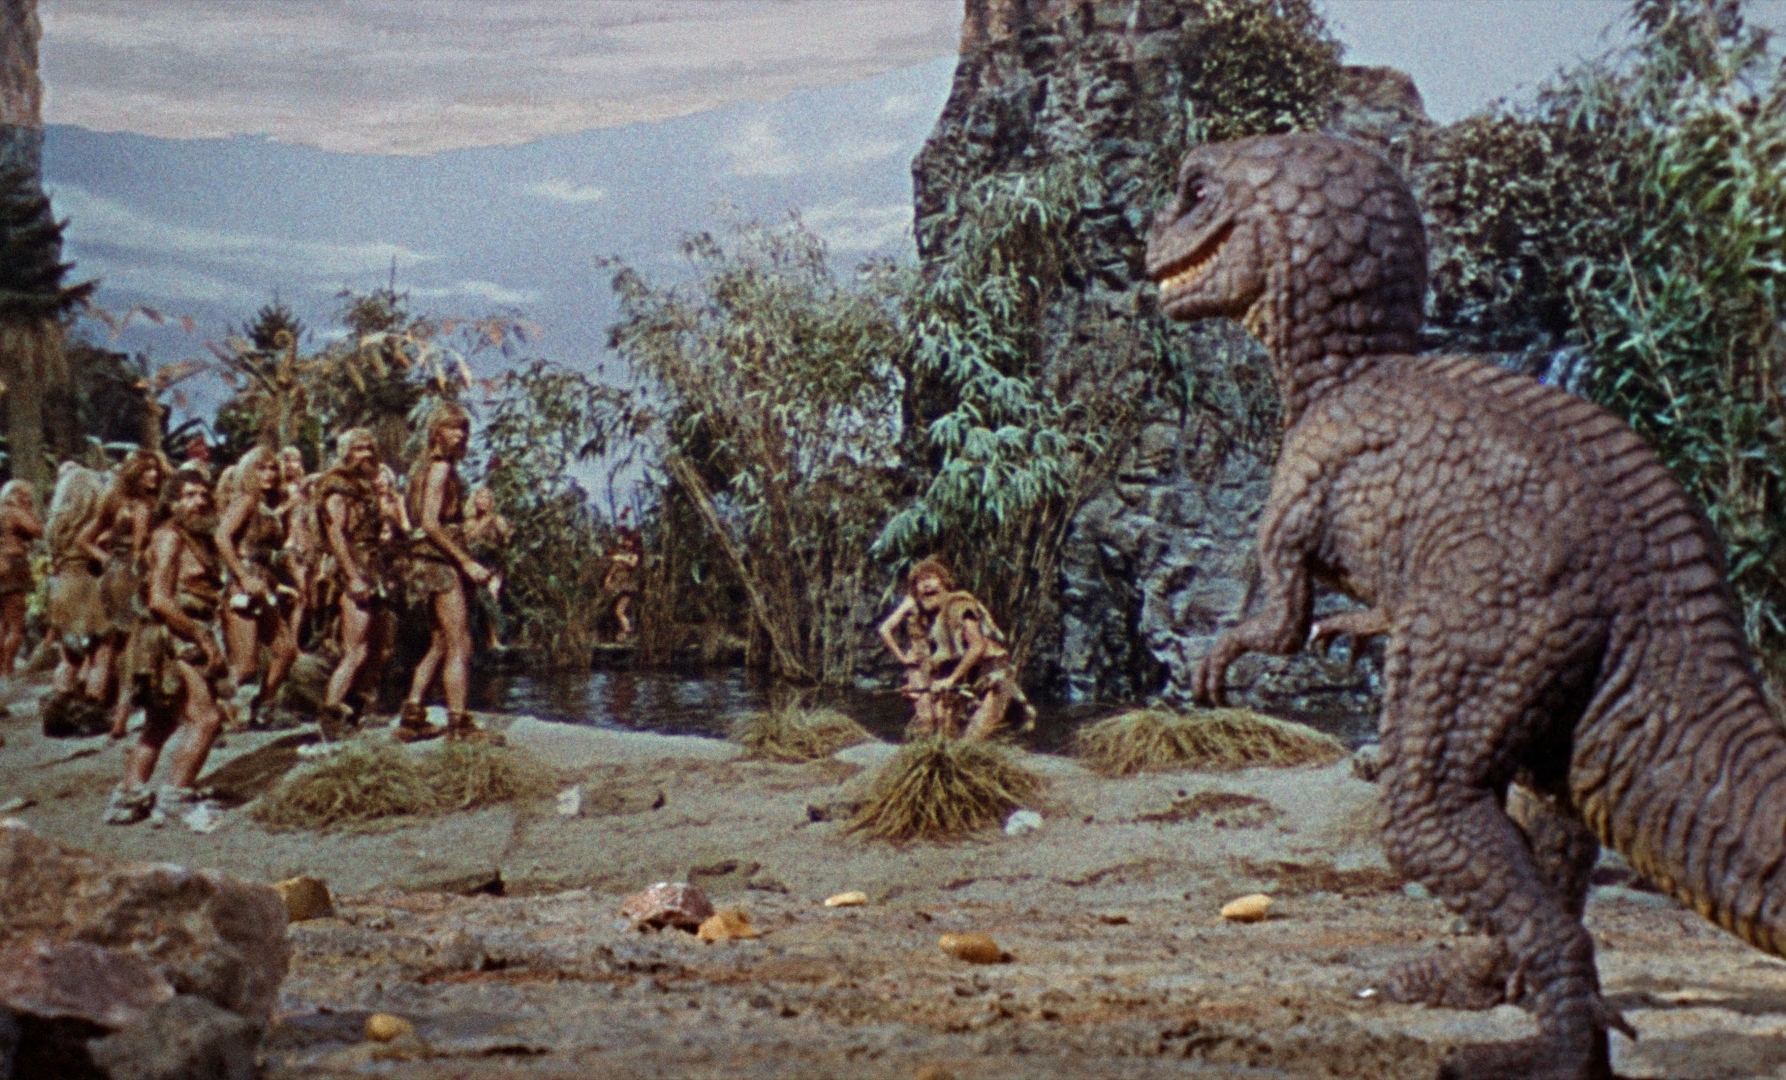 Dinosaurs ruled the earth nudity when When Dinosaurs